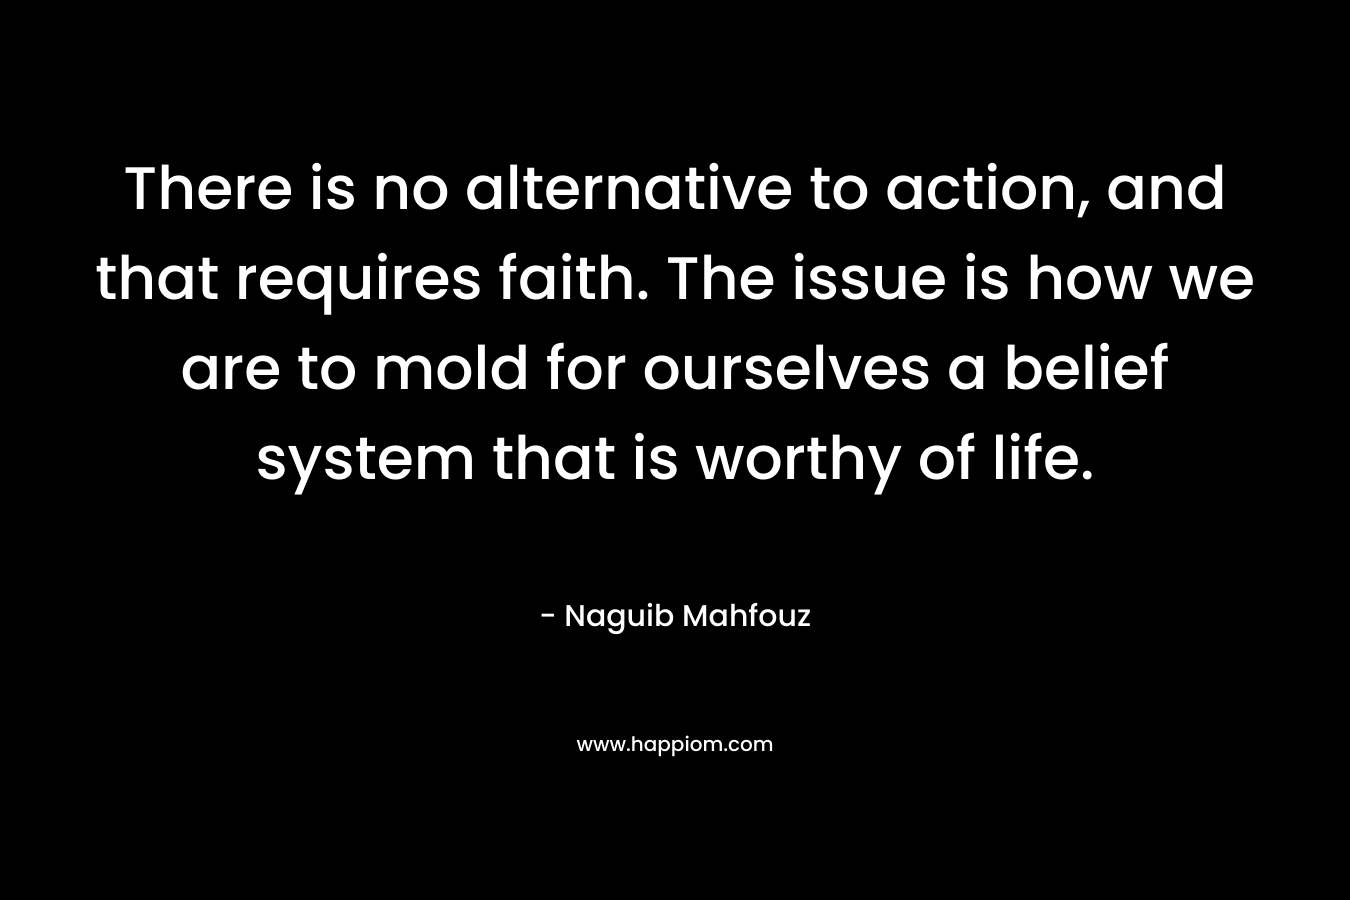 There is no alternative to action, and that requires faith. The issue is how we are to mold for ourselves a belief system that is worthy of life.